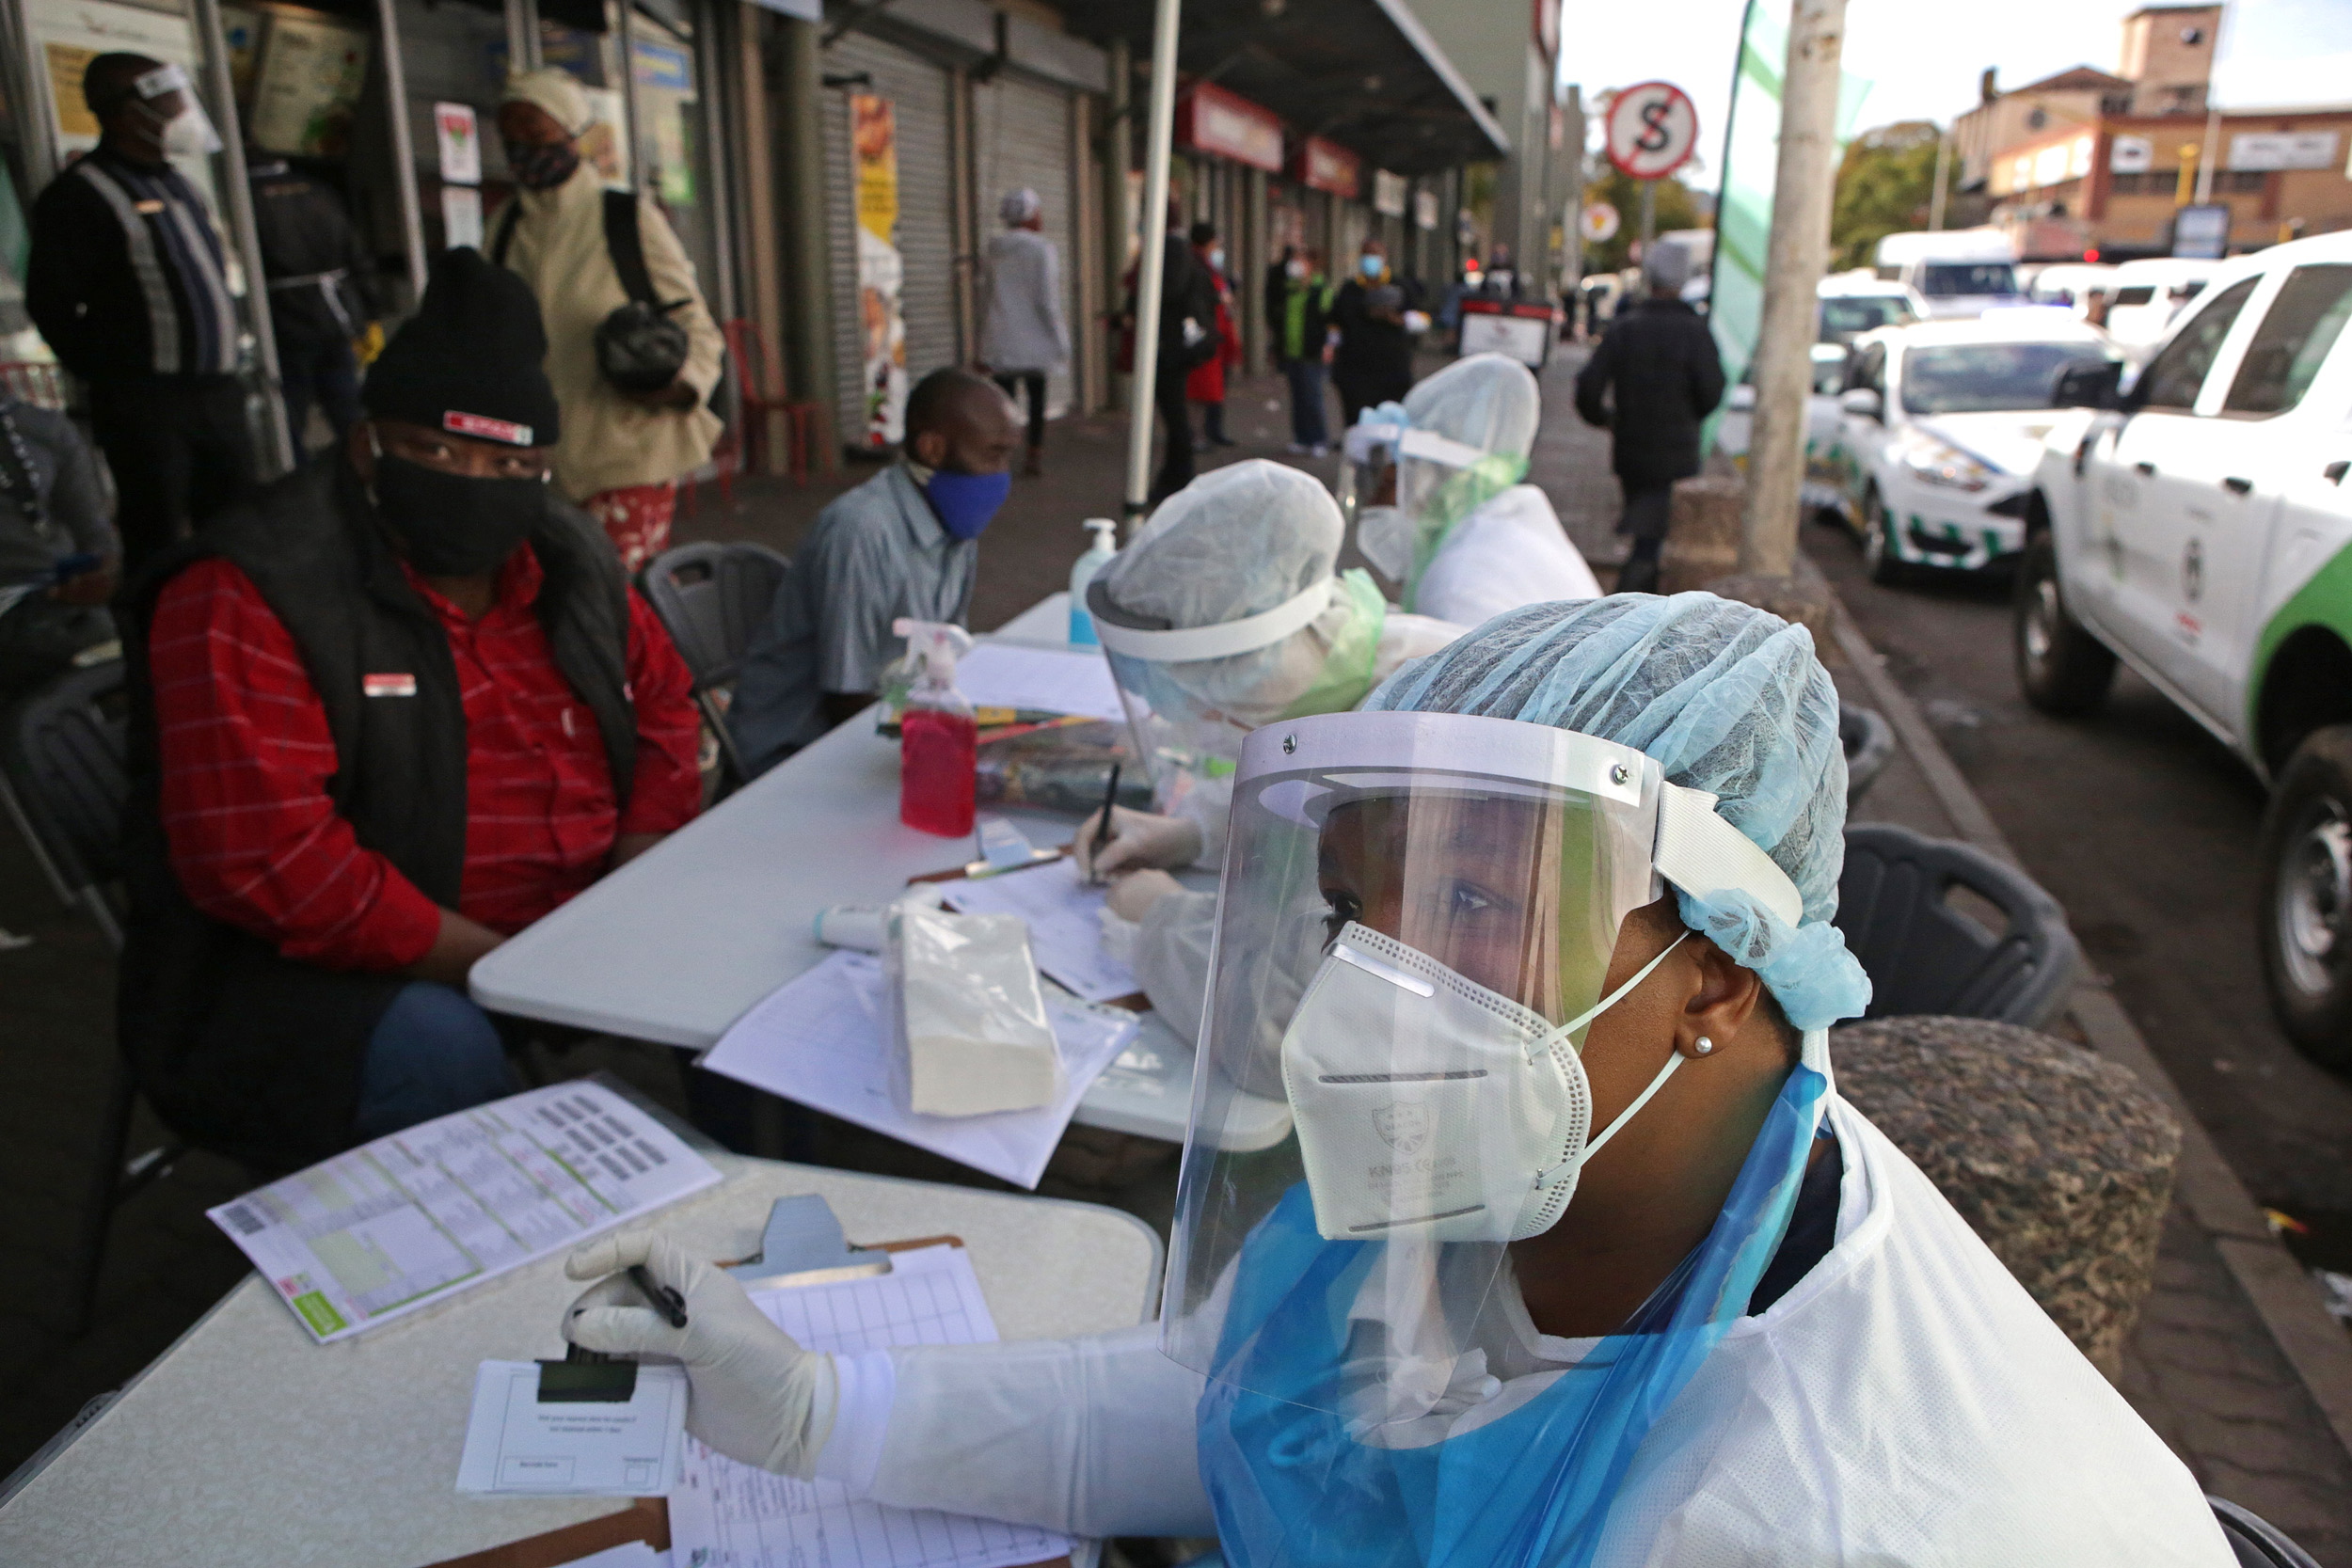 A City of Tshwane Health official looks on as she conducts a screening exercise on a taxi operator before testing for COVID-19 at the Bloed Street Mall in Pretoria, South Africa, on June 11.